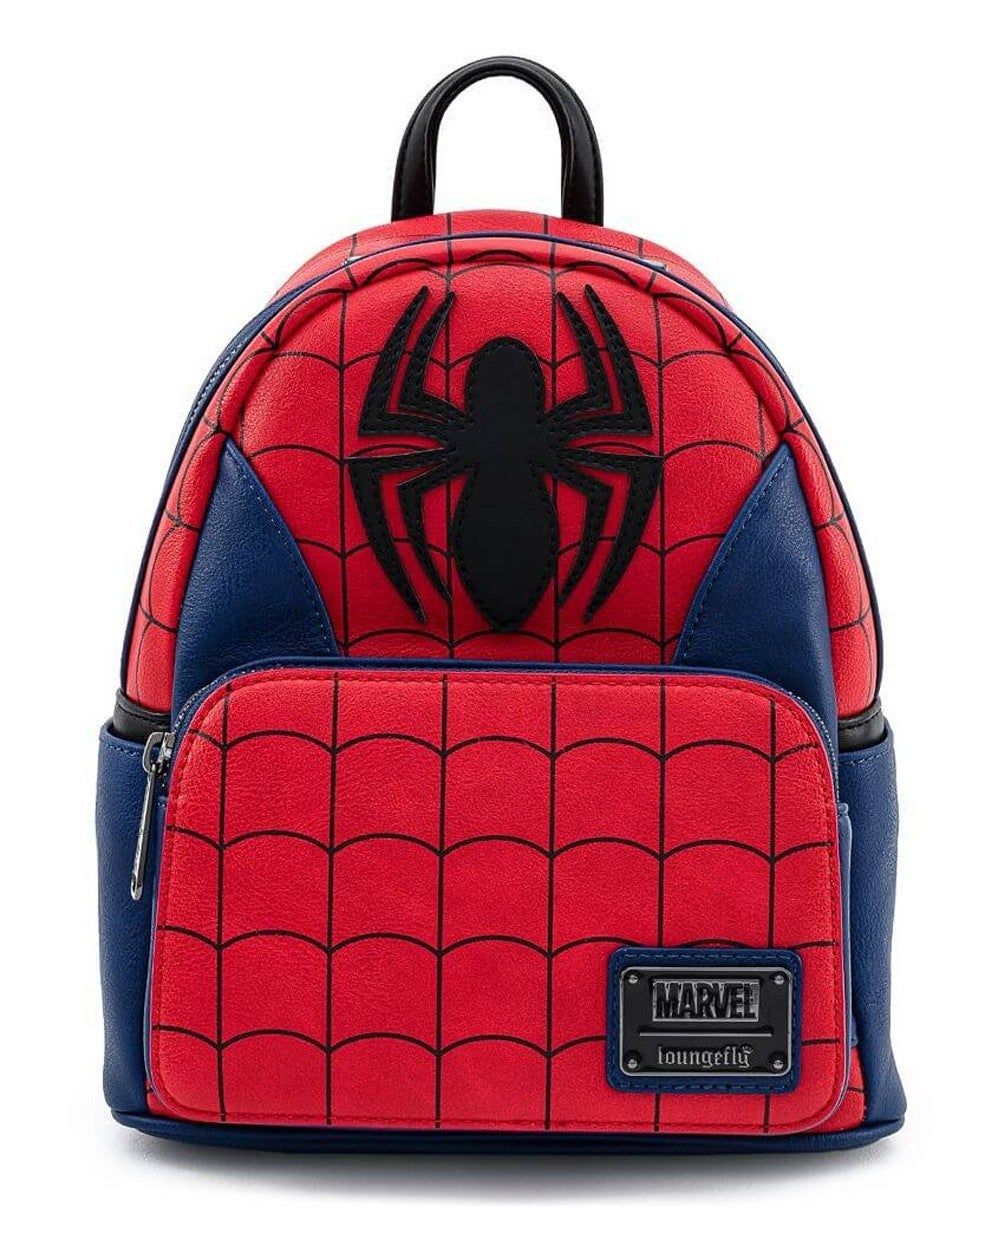 Loungefly Marvel Spiderman Classic Cosplay Mini Backpack - Merchoid